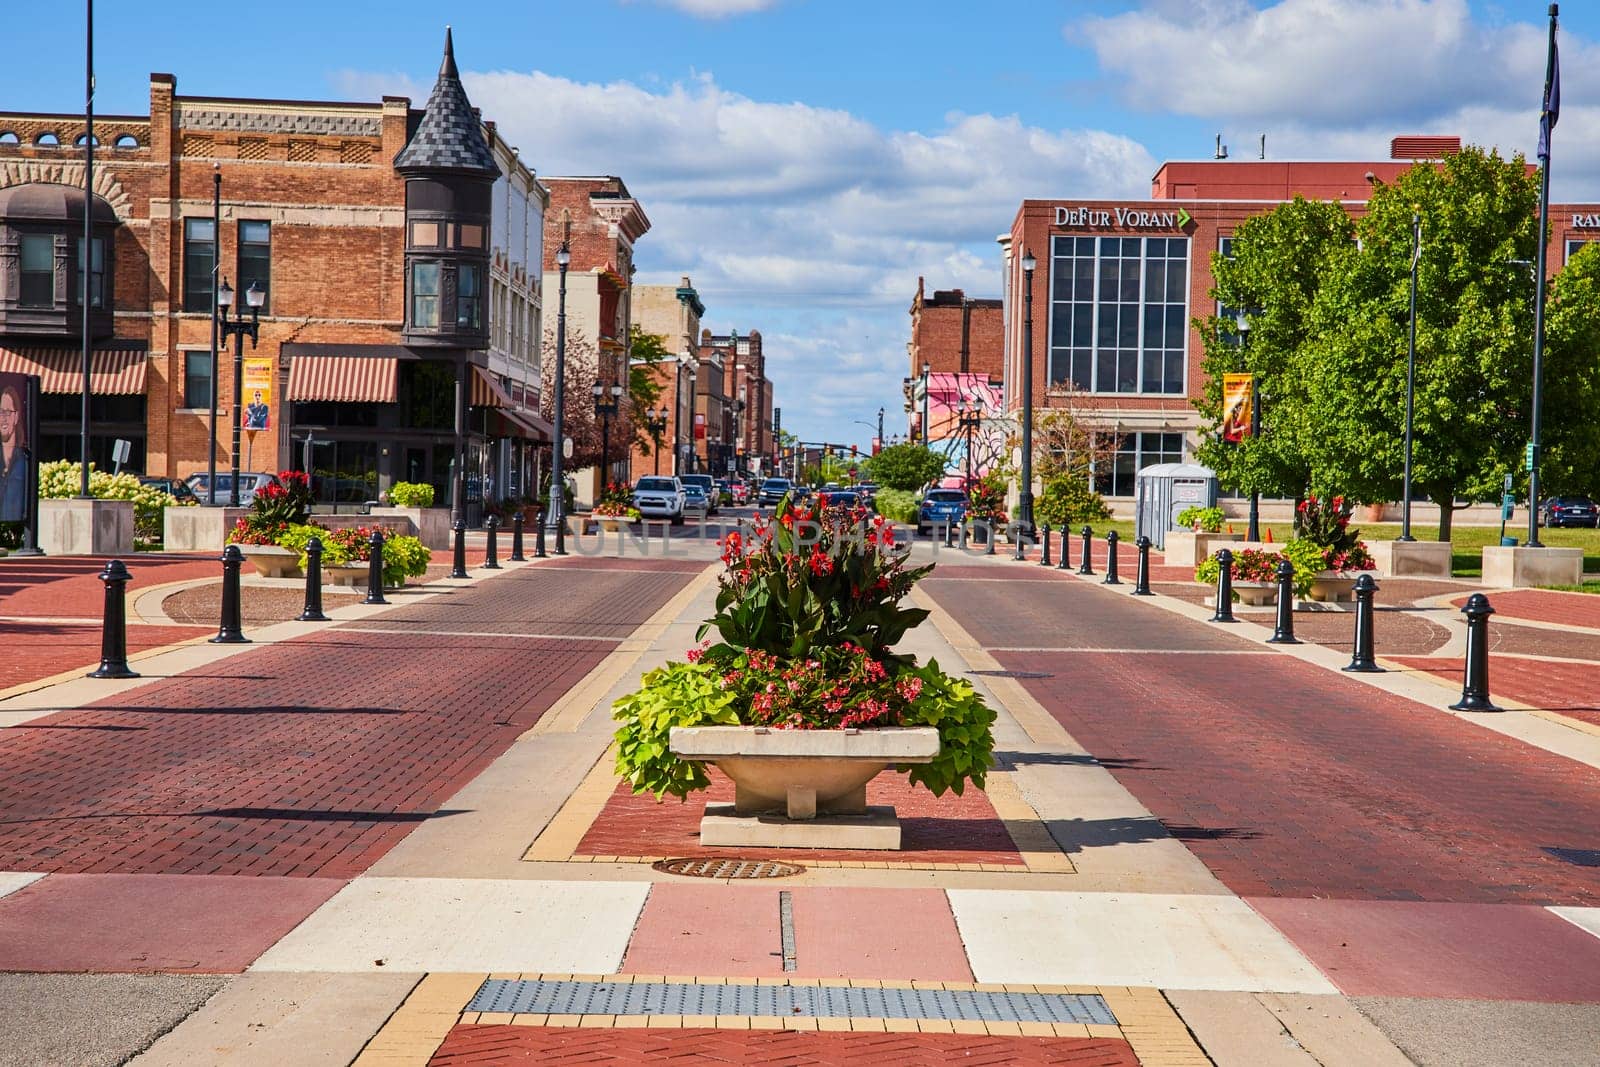 Downtown Muncie, Indiana in 2023: Vibrant flower planters enhancing pedestrian walkway amid historic and modern buildings.